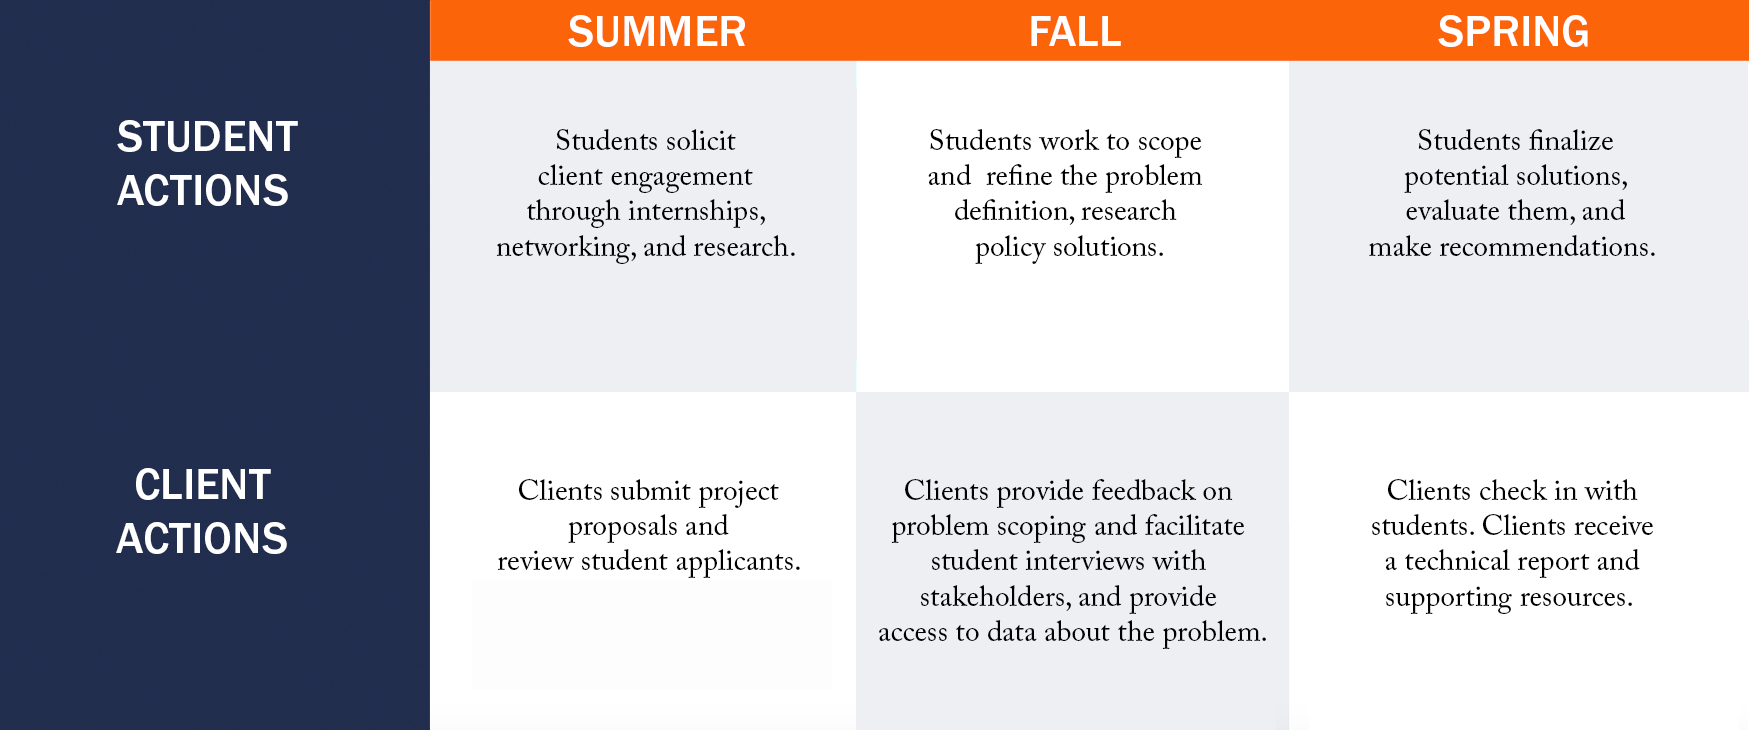 Student Actions and Client Actions